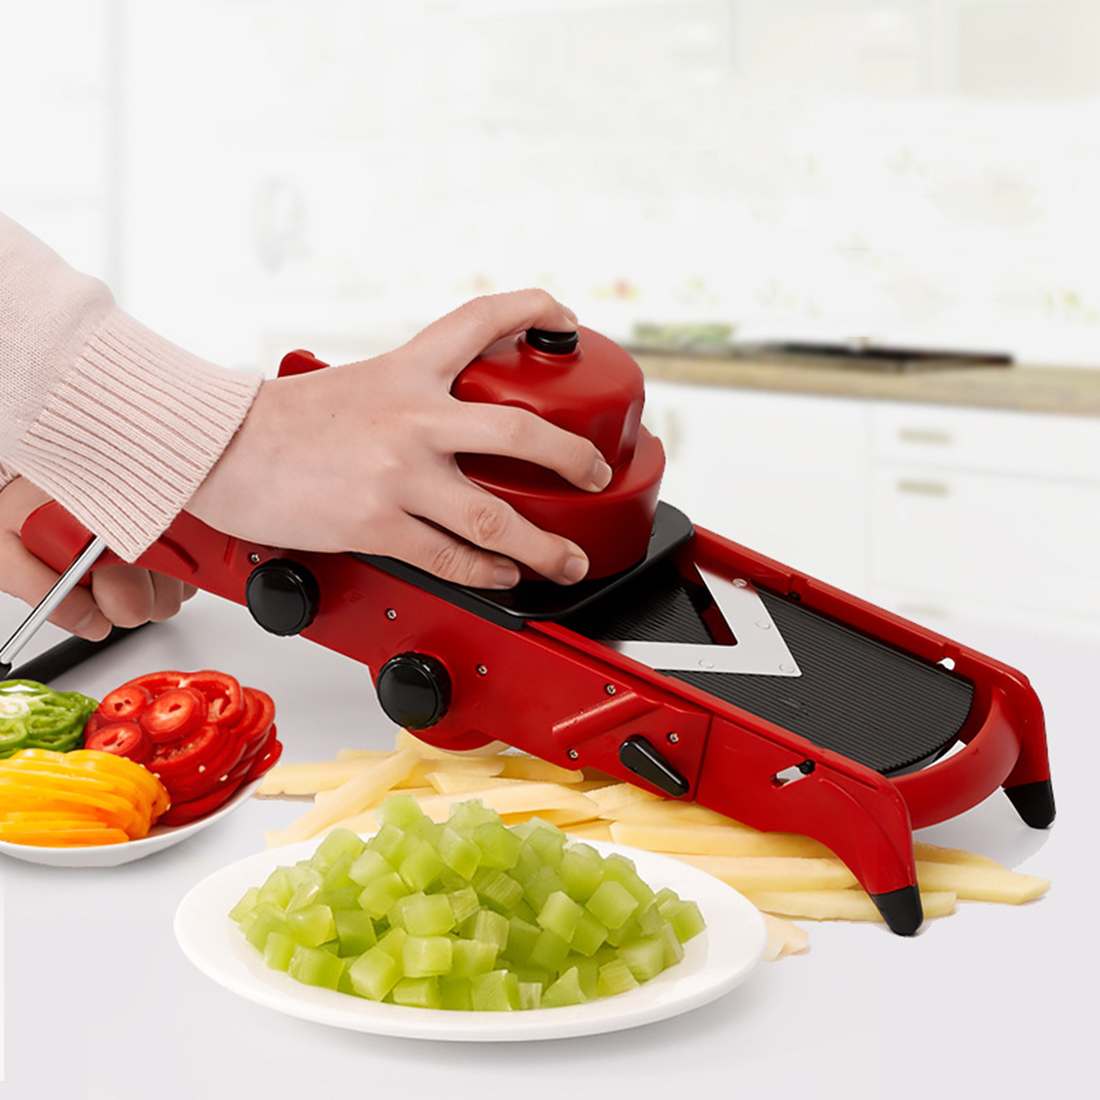 

Creative Red Slicer Vegetable Fruit Cutter With Stainless Steel Blade Manual Potato Peeler Carrot Grater Kitchen Tools Gadgets